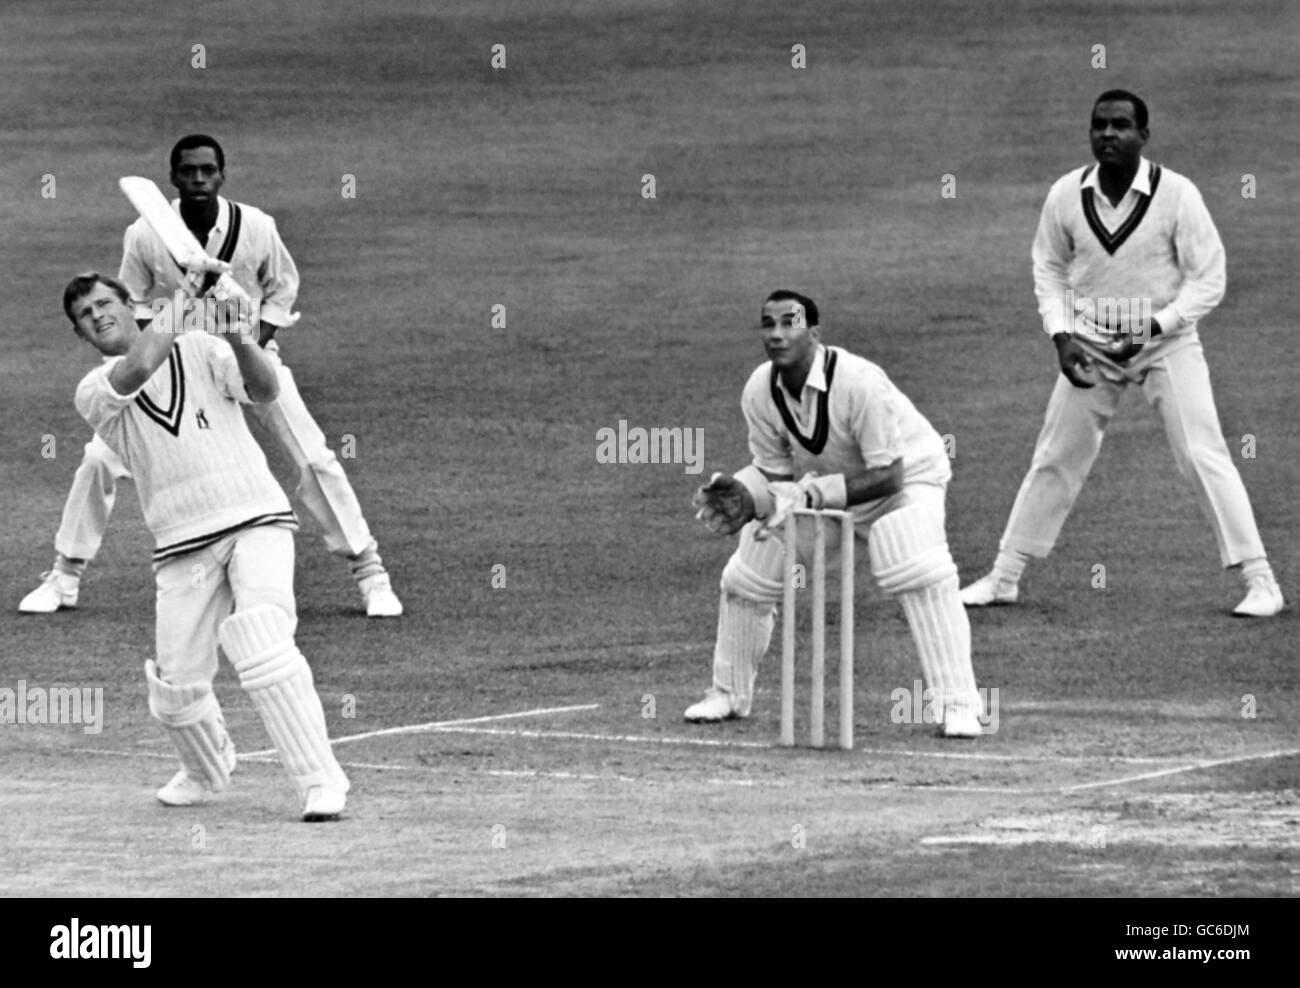 Cricket - Marylebone Cricket Club -President's XI v West Indians - West Indies in British Isles 1966 - Day Three - Lord's cri... Stock Photo